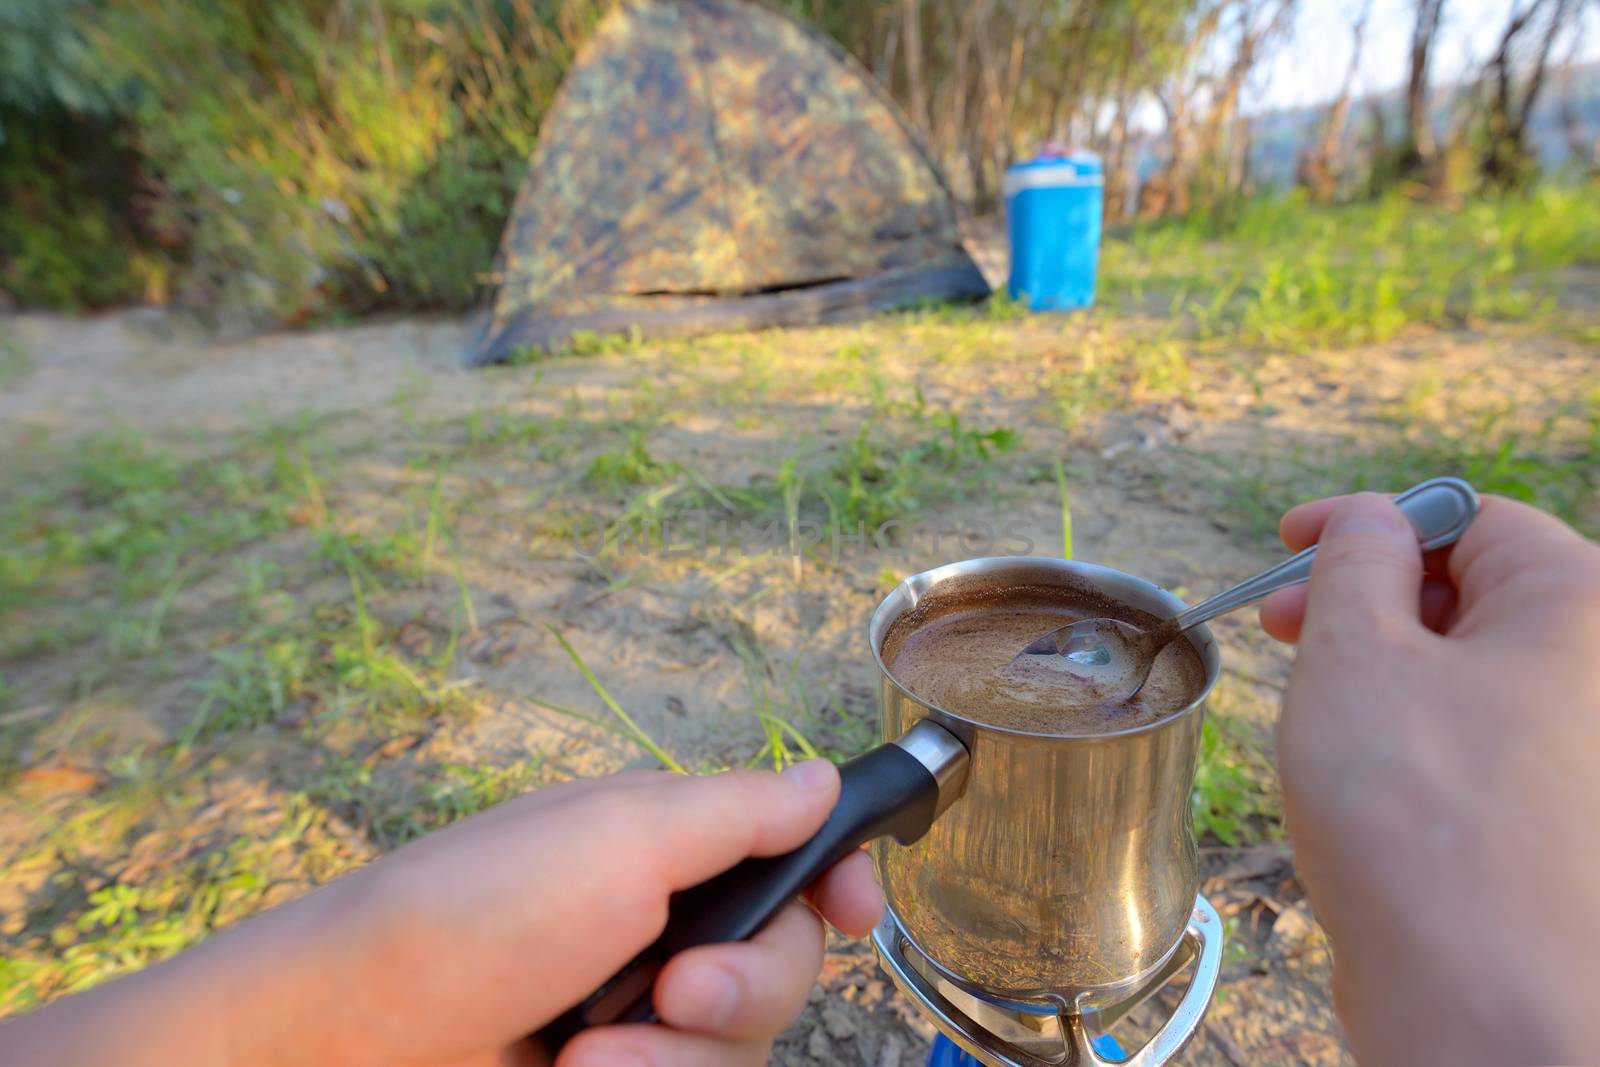 Making coffee on campfire by jordachelr